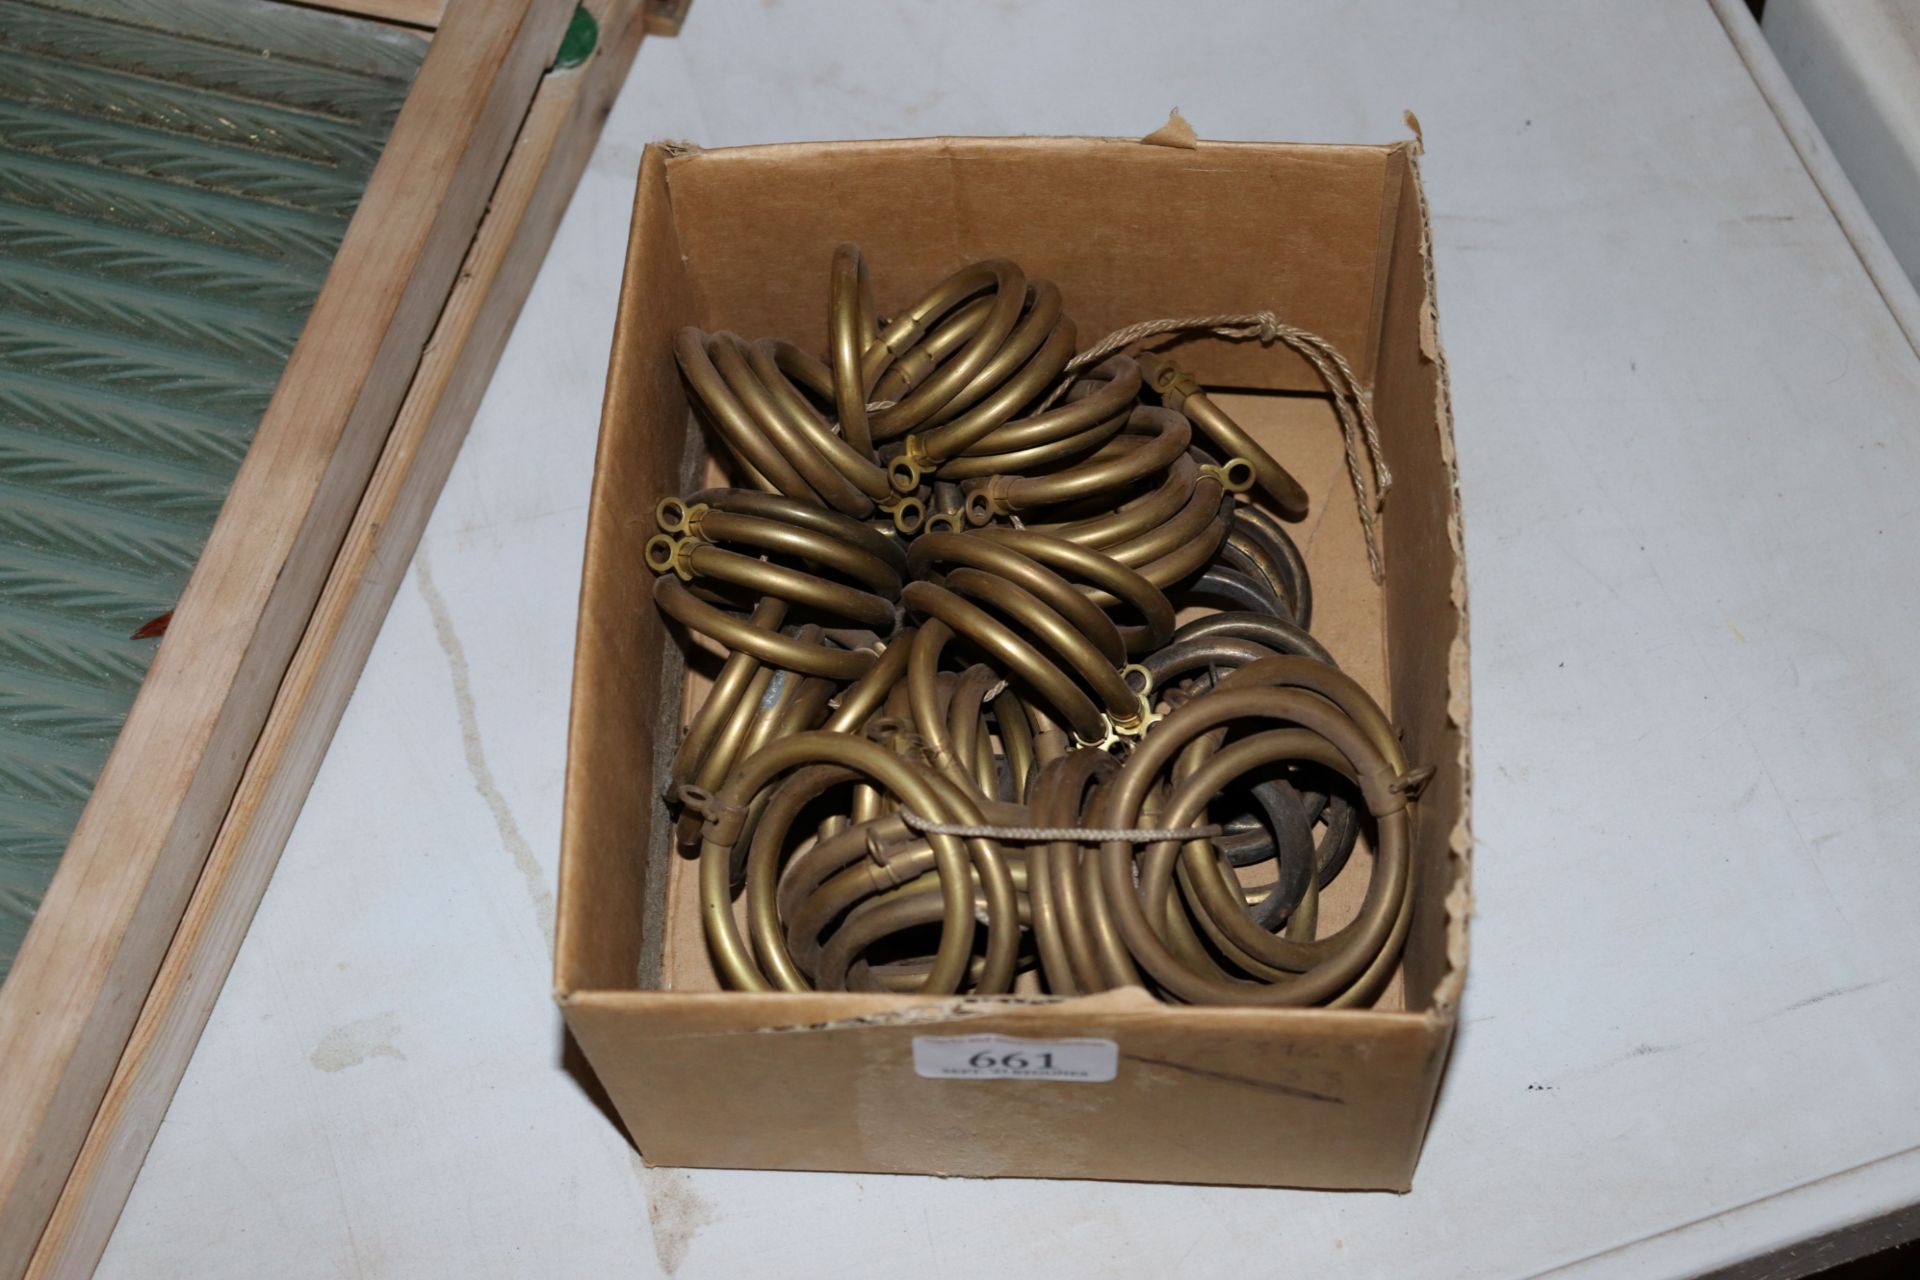 A box containing miscellaneous brass curtain rings